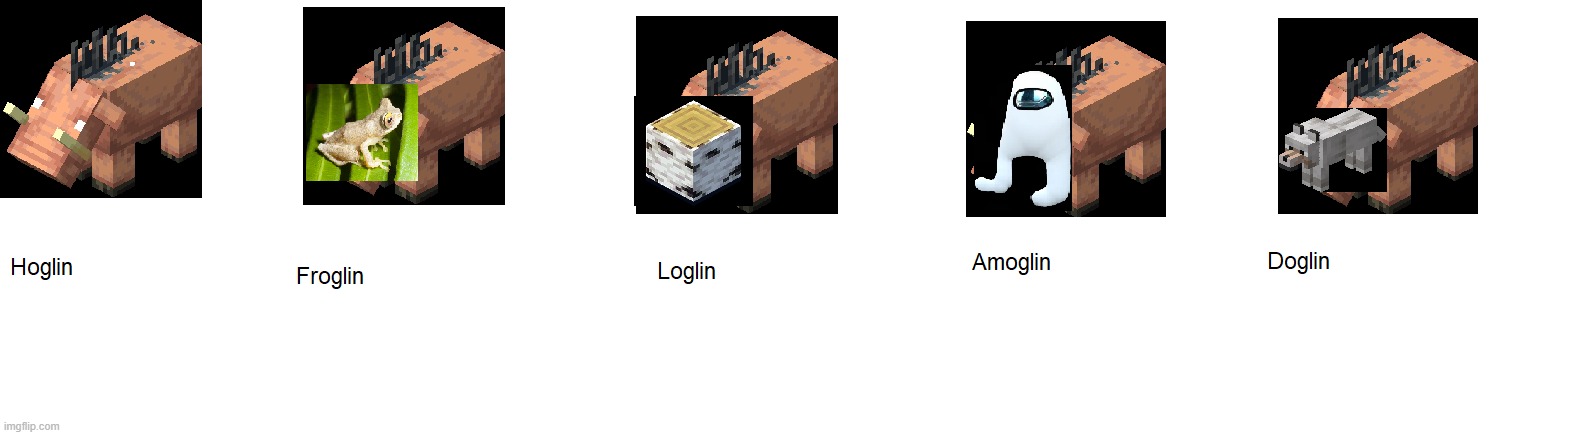 Types of Hoglins in Minecraft | image tagged in minecraft,dog,amogus,frog | made w/ Imgflip meme maker